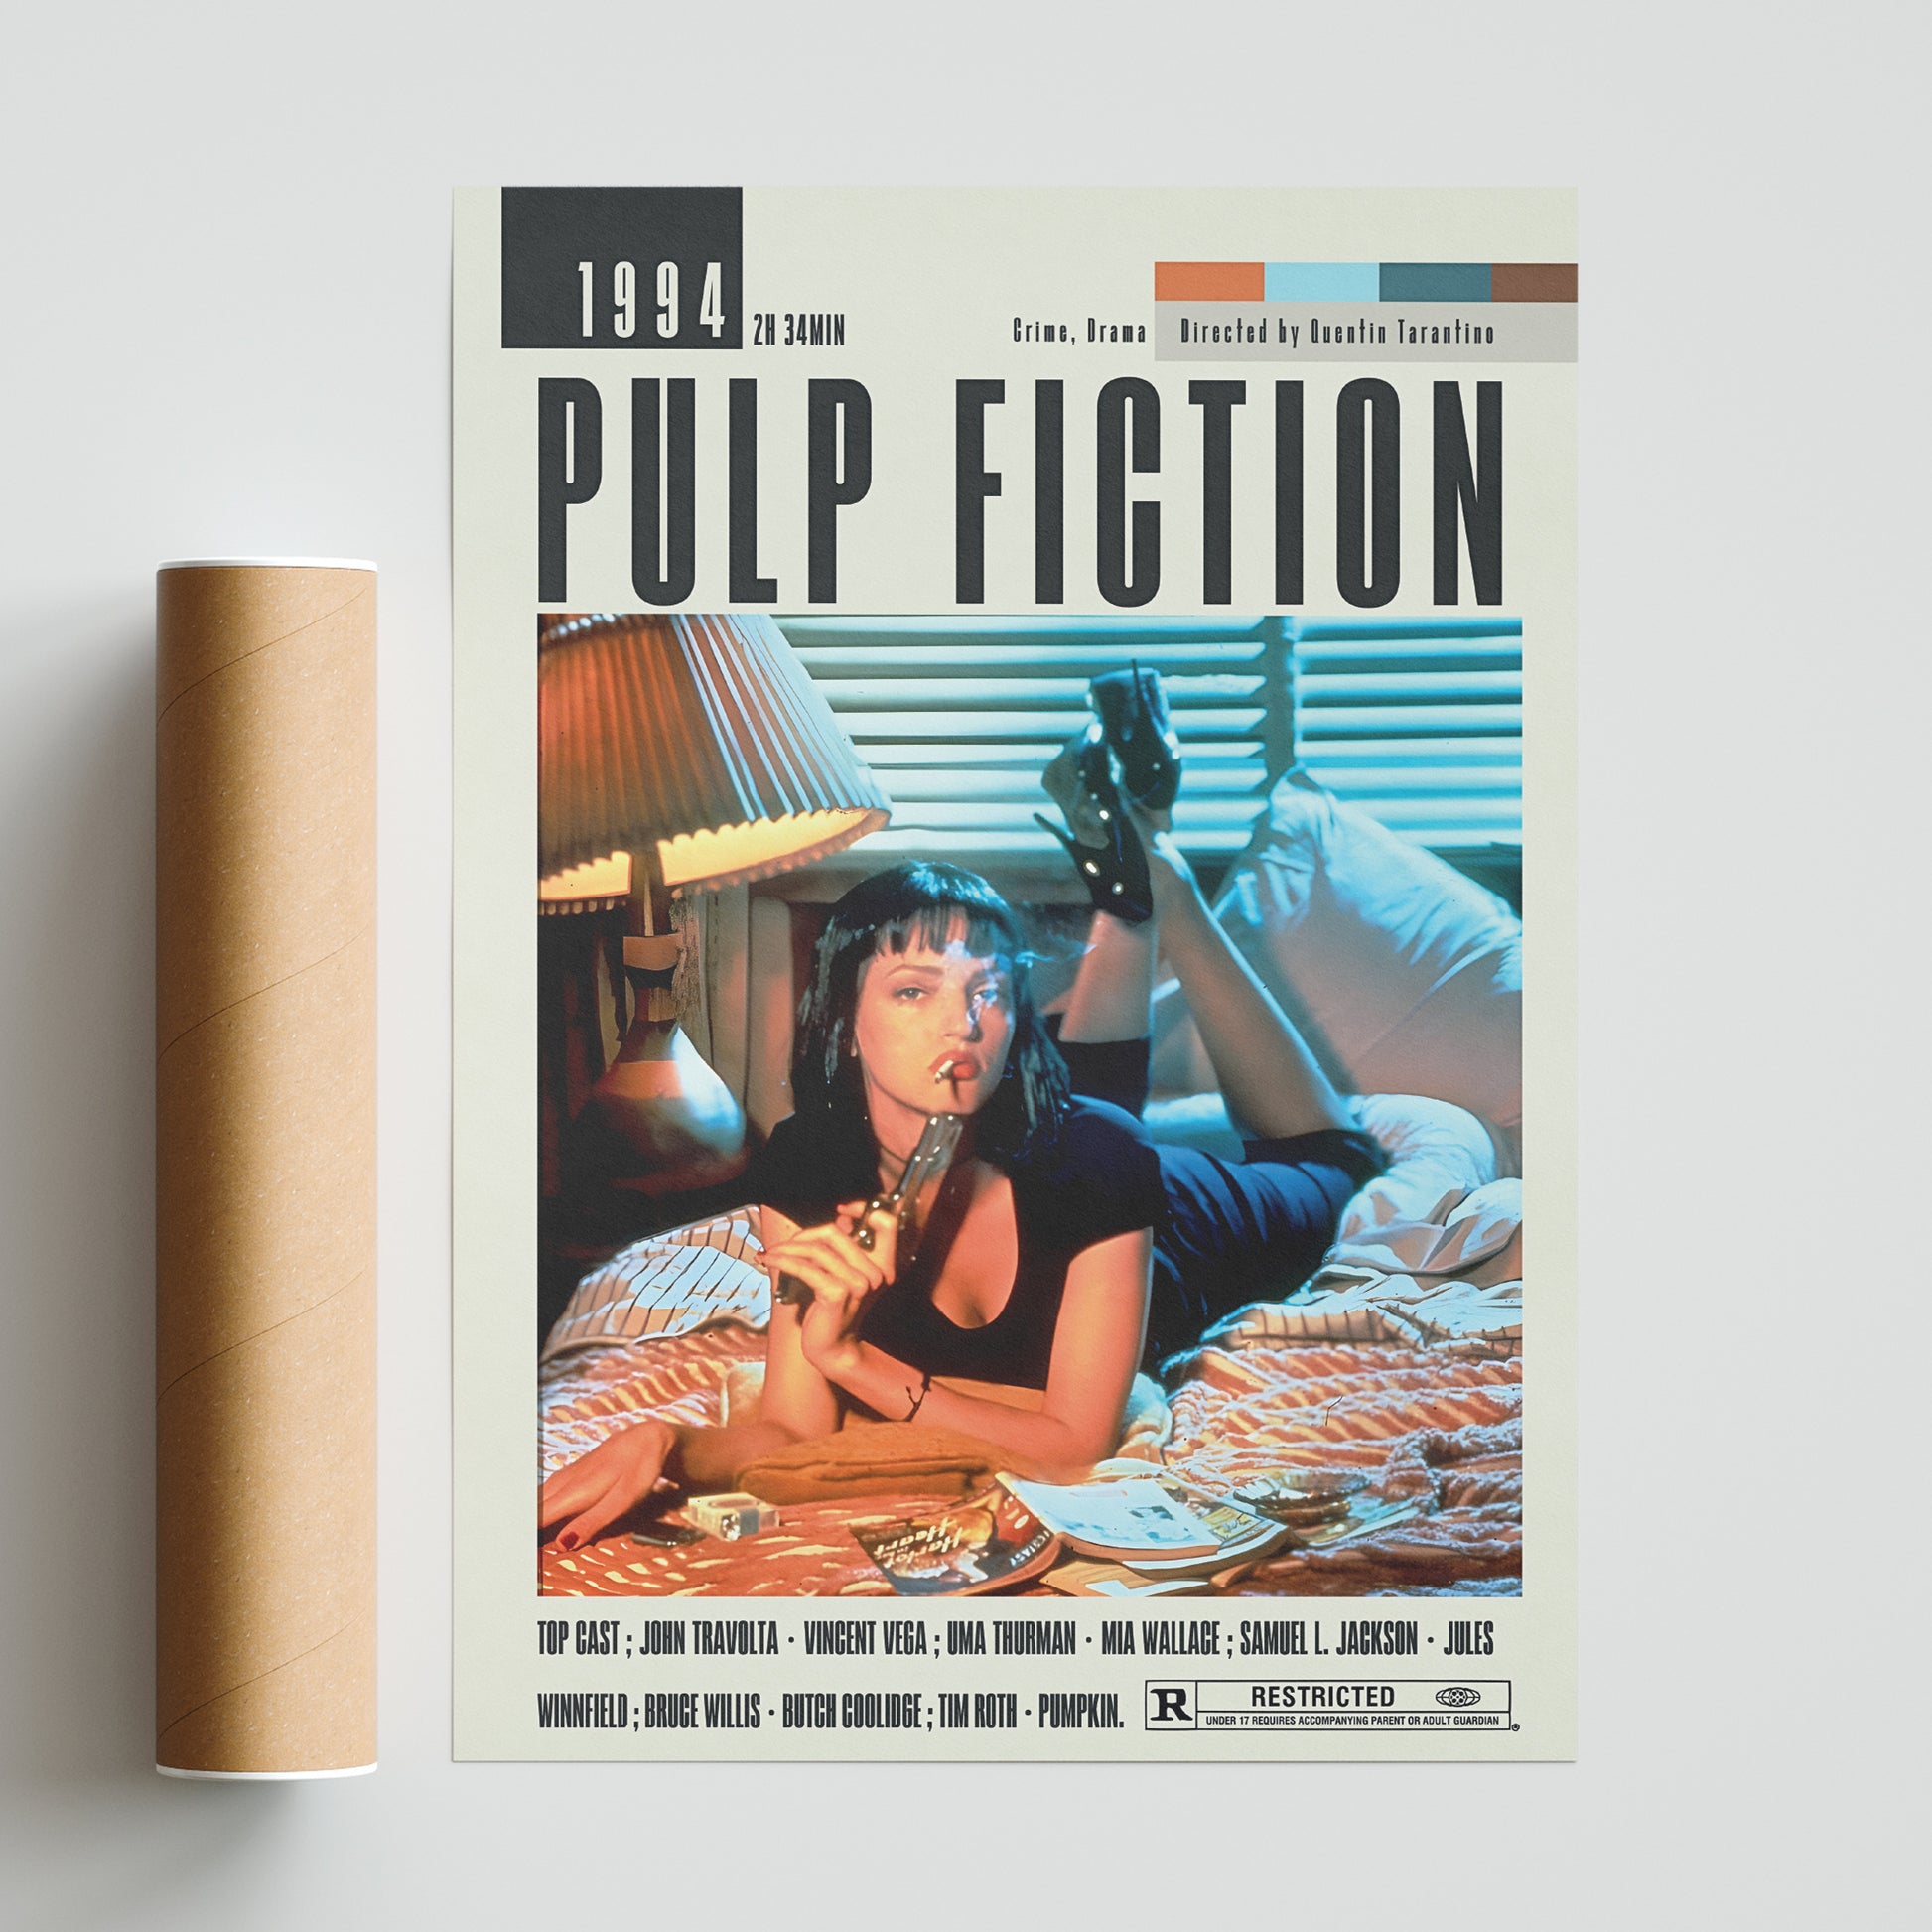 Enhance your home decor with our original, high-quality Pulp Fiction posters. Choose from a range of sizes, including A6 to A3, and bring a touch of midcentury modern style to any room with our vintage-inspired movie art posters. Add a minimalist touch with our custom prints and elevate your space with the best movies of all time.